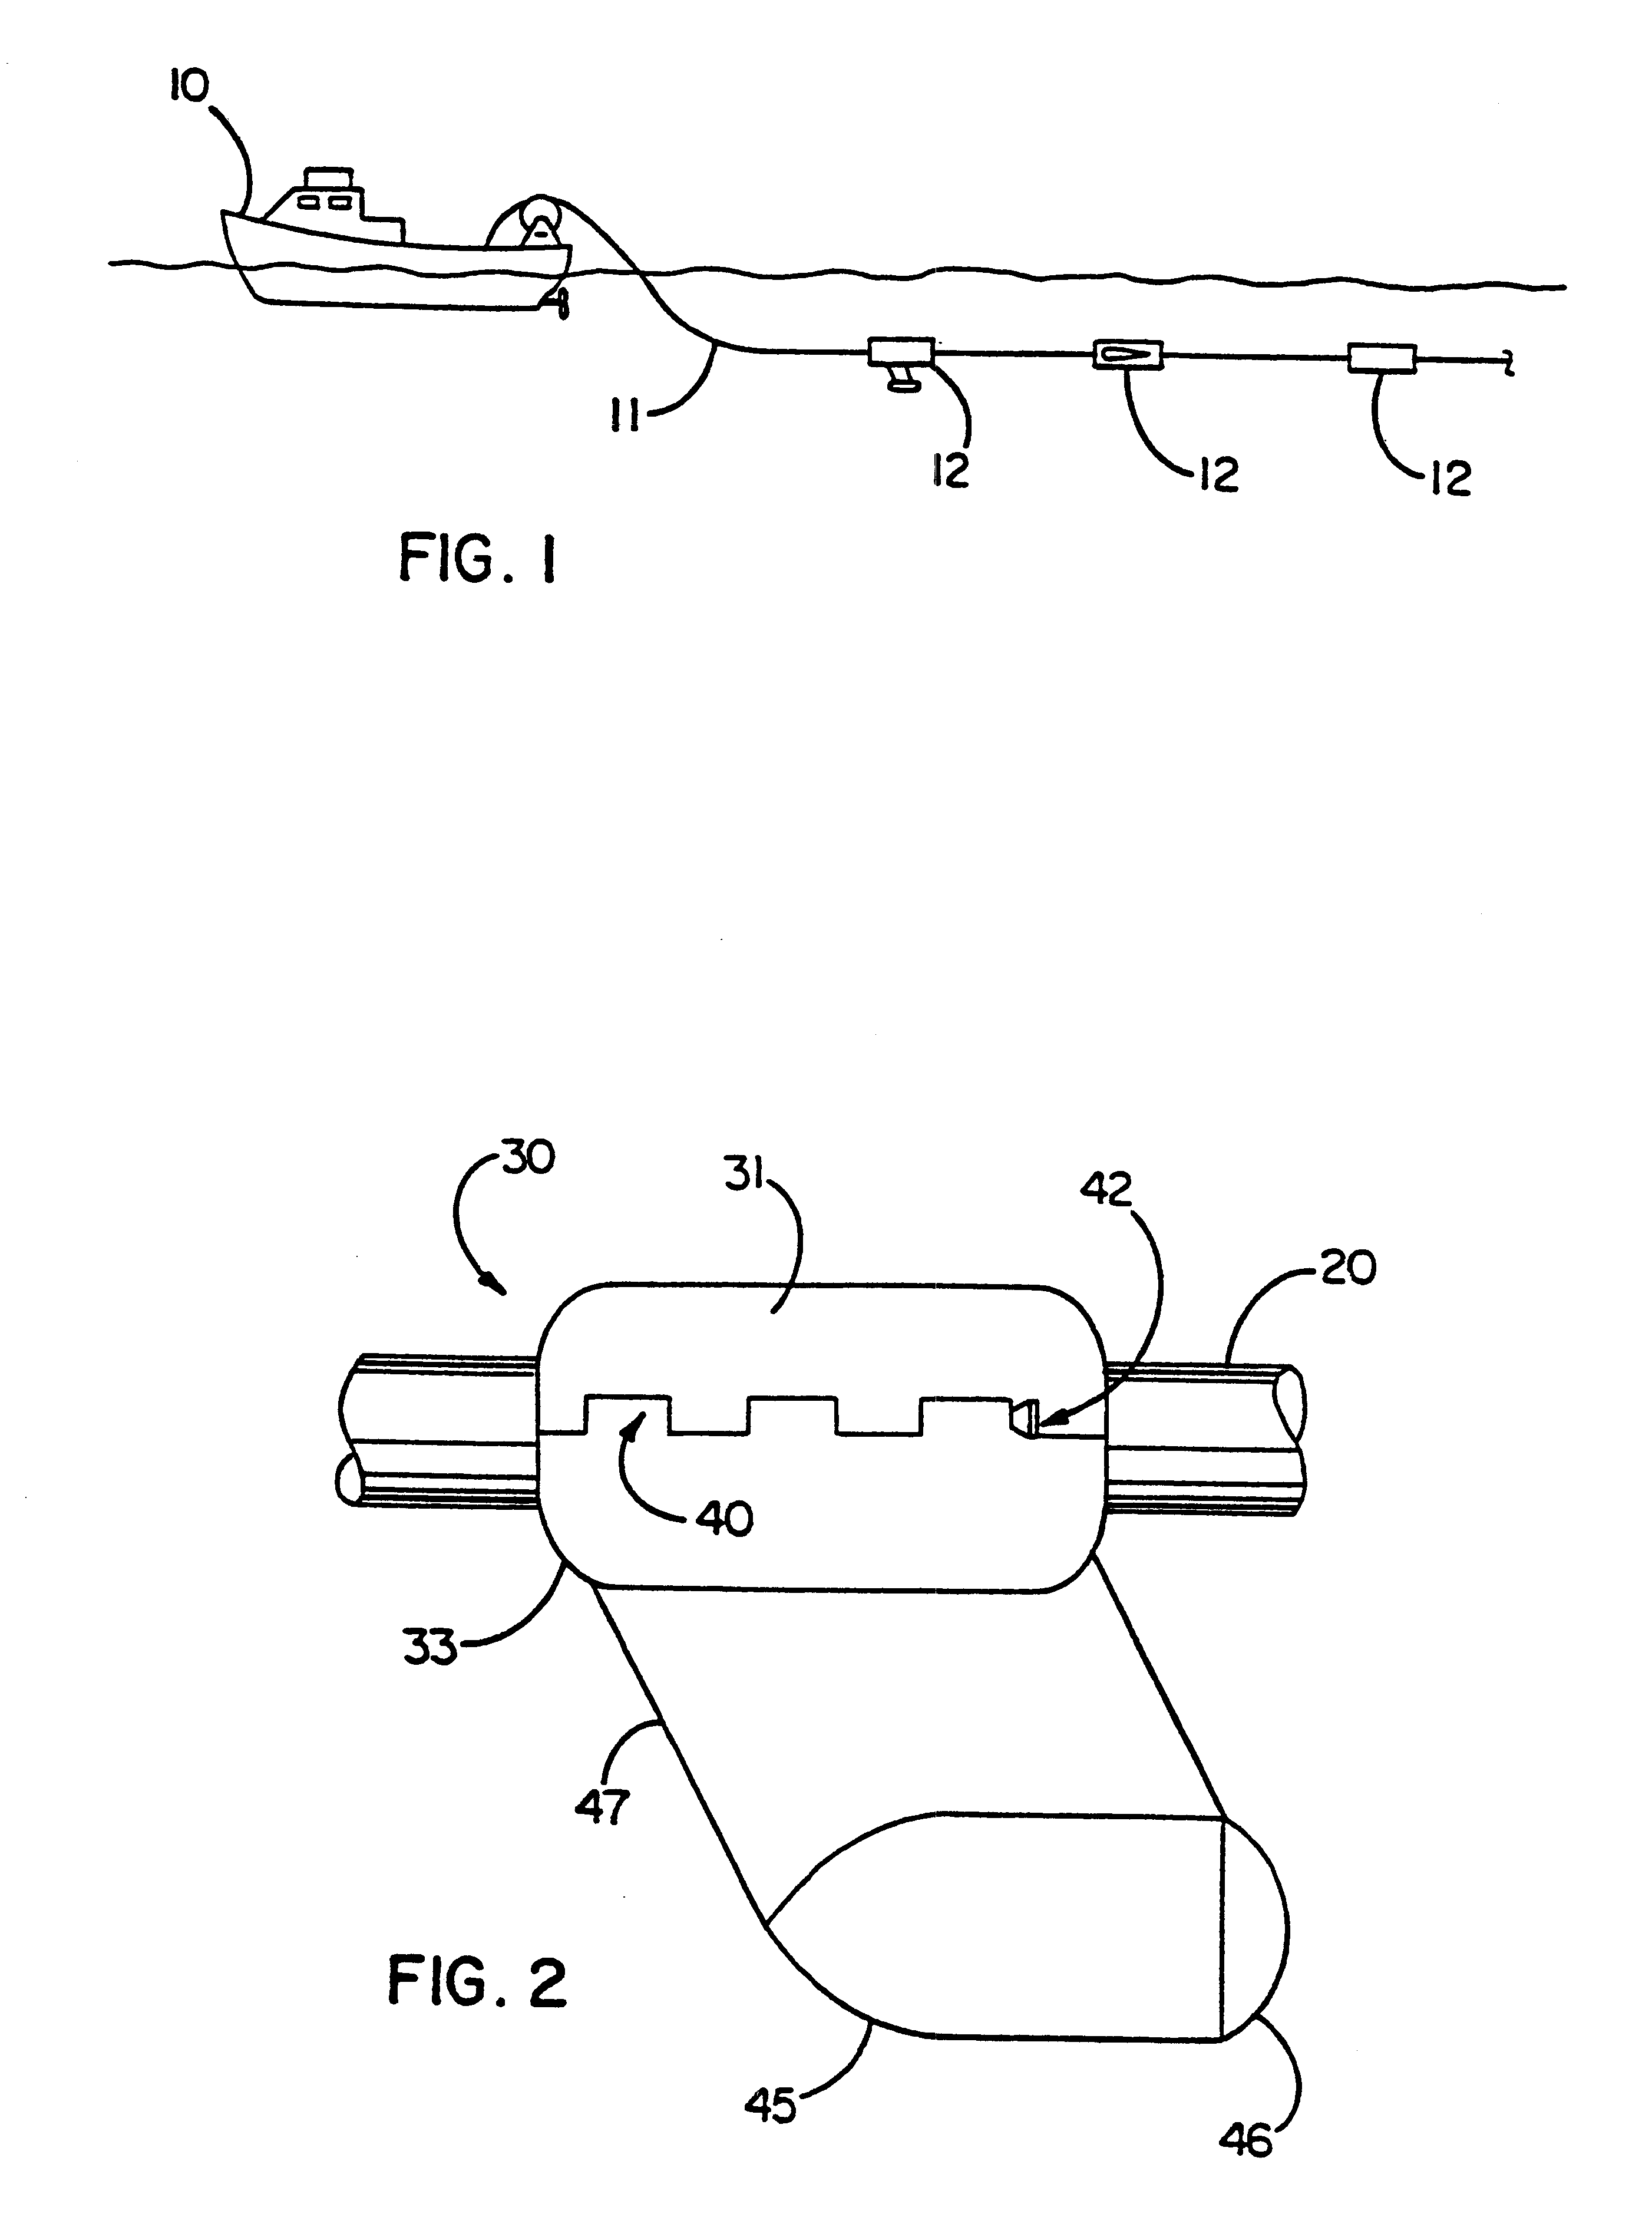 Underwater cable arrangements, internal devices for use in an underwater cable, and methods of connecting and internal device to a stress member of an underwater cable